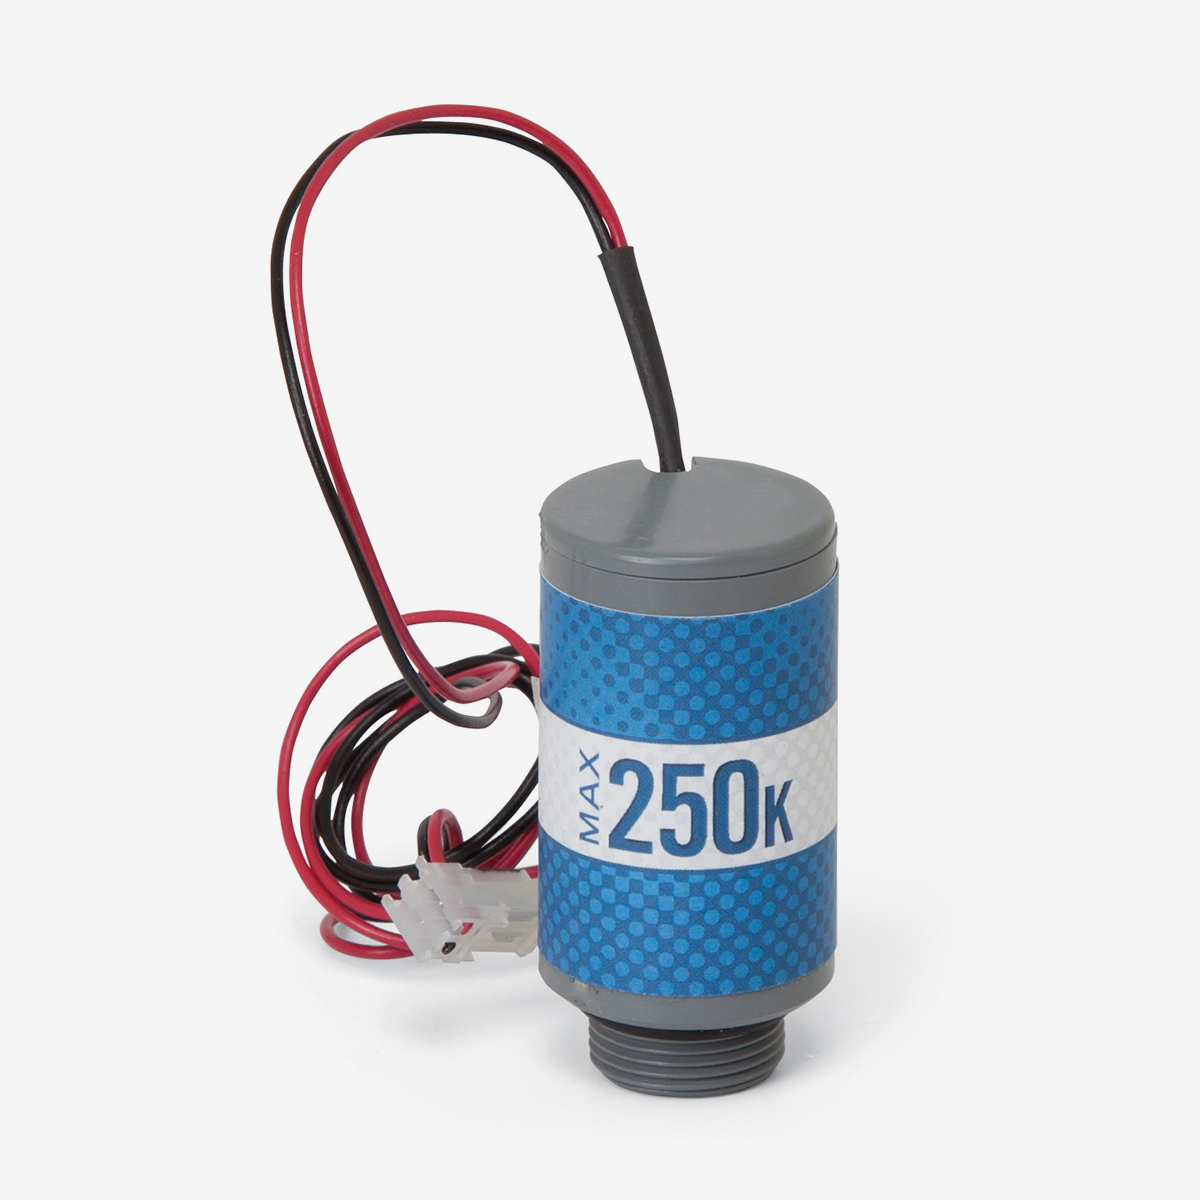 Blue and grey cylindrical Max-250k oxygen sensor with panduit connector on white background